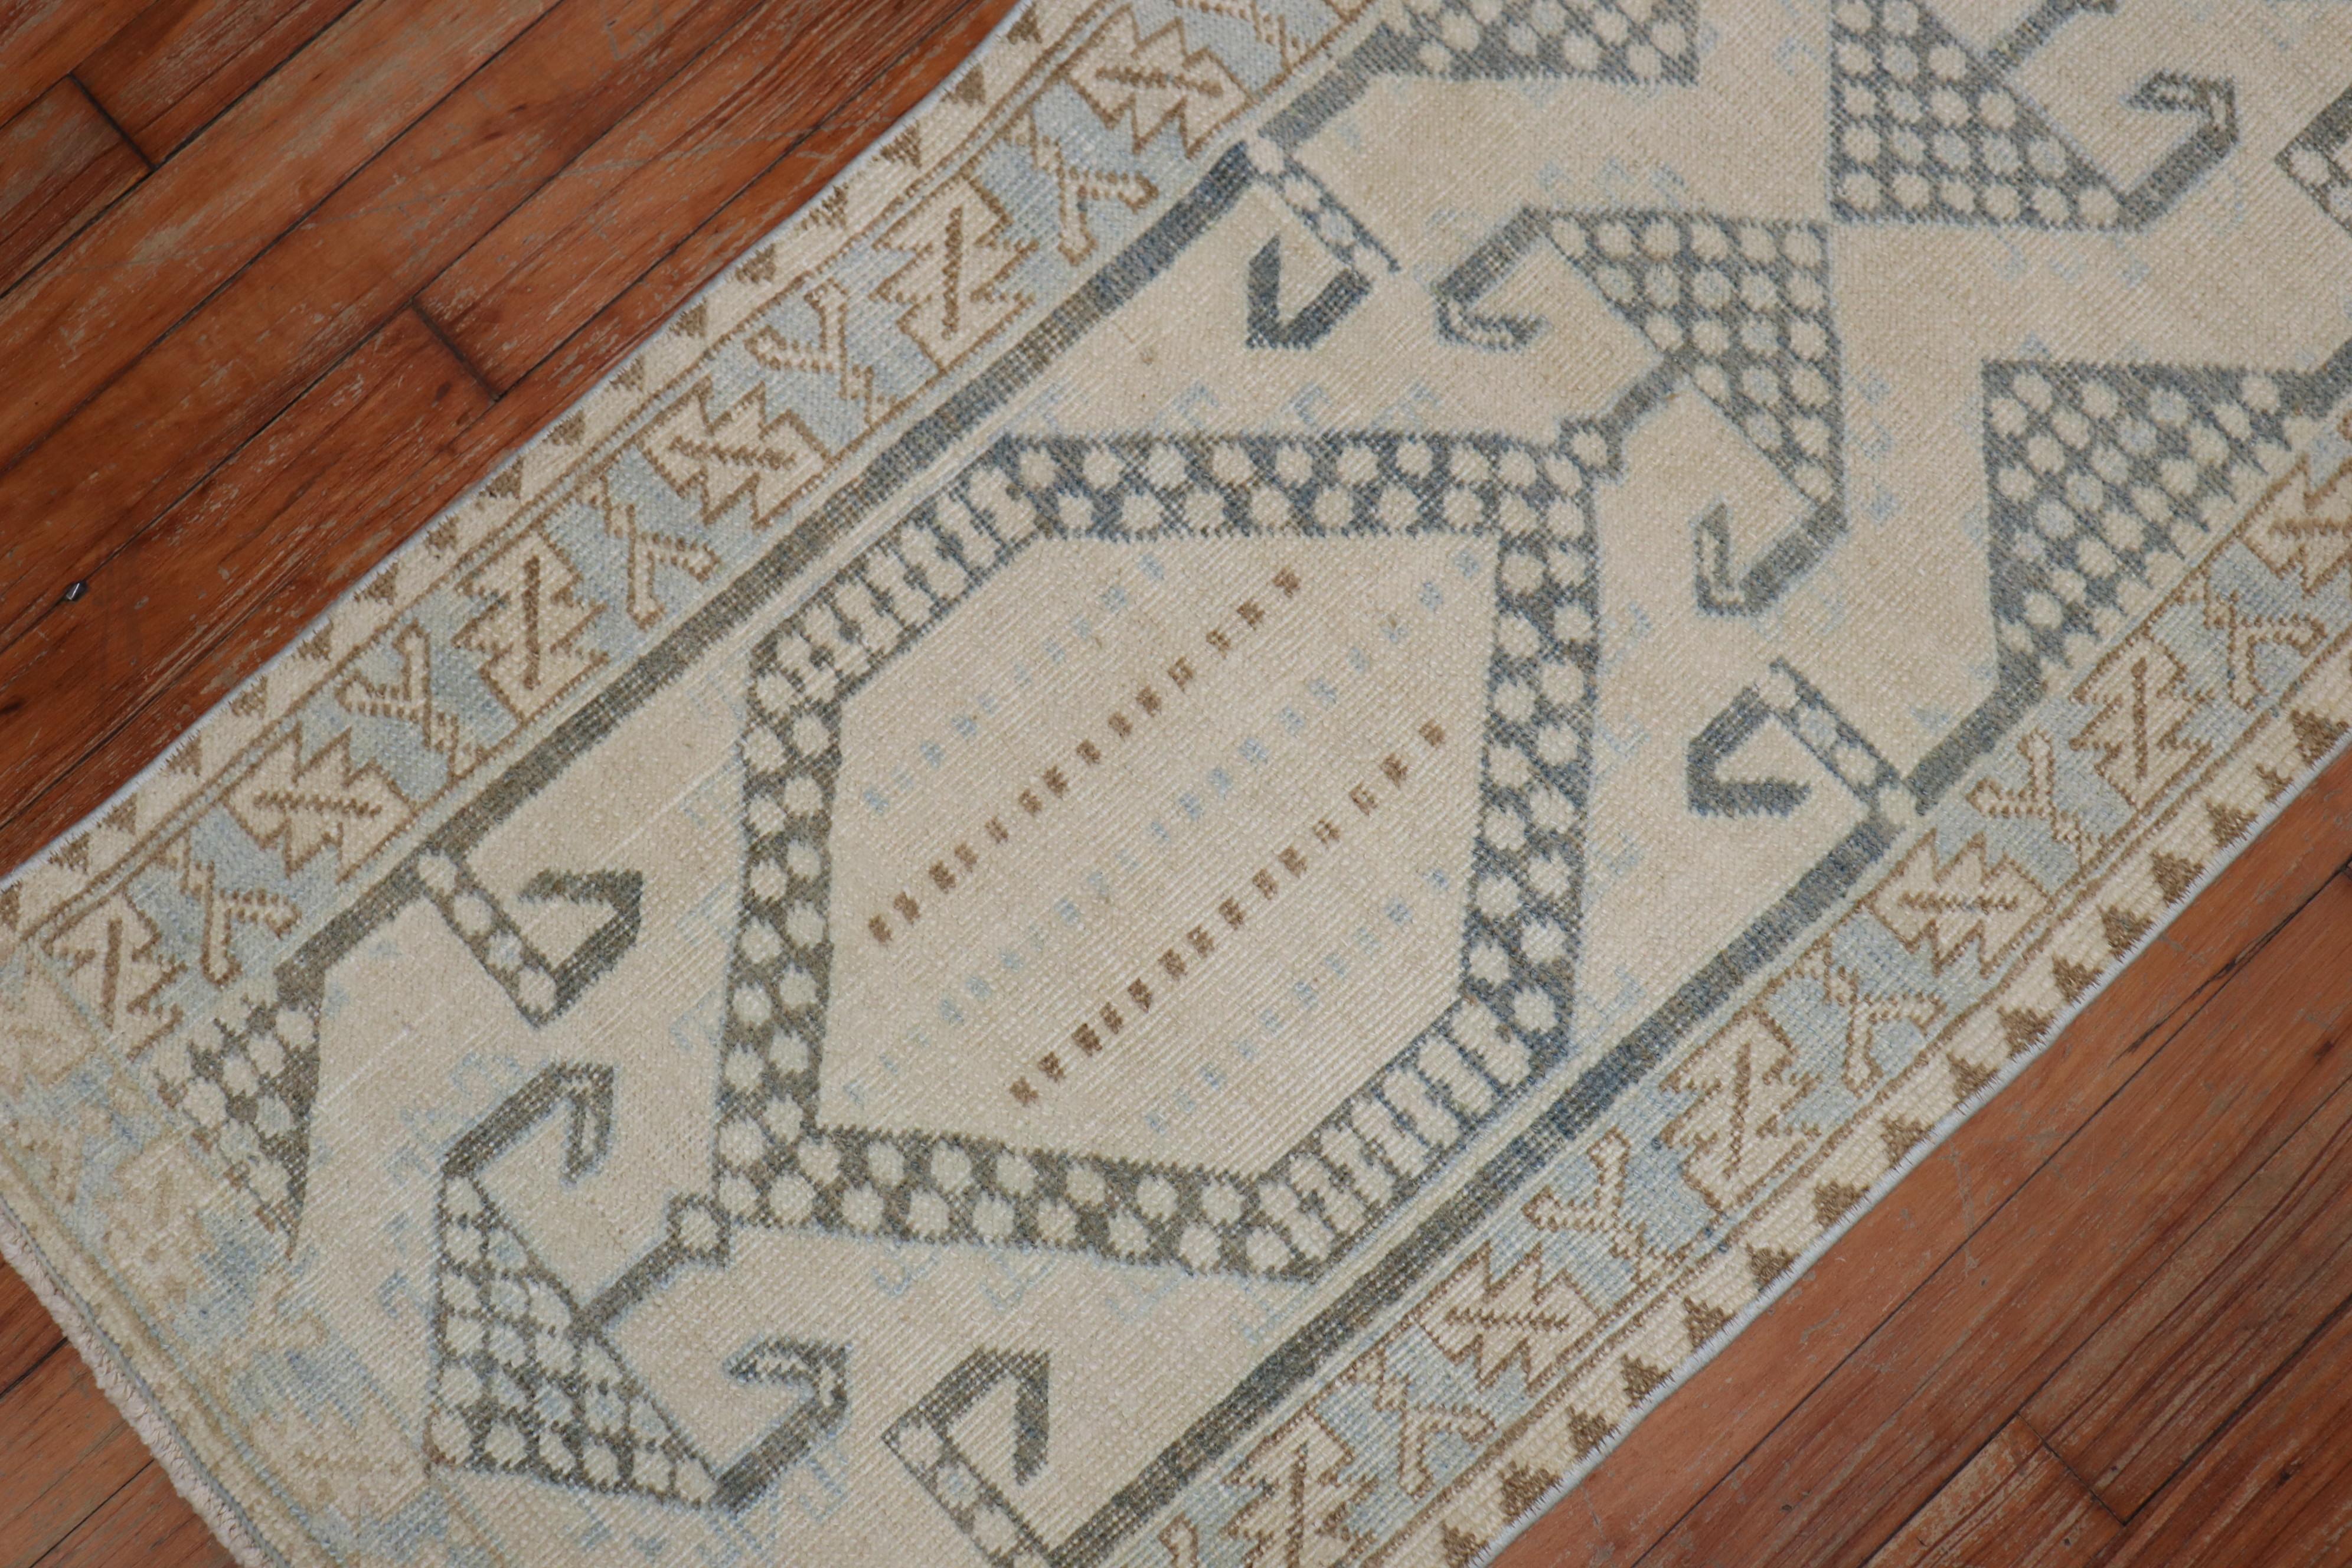 Rustic Narrow Neutral Color Persian Runner, Mid-20th Century For Sale